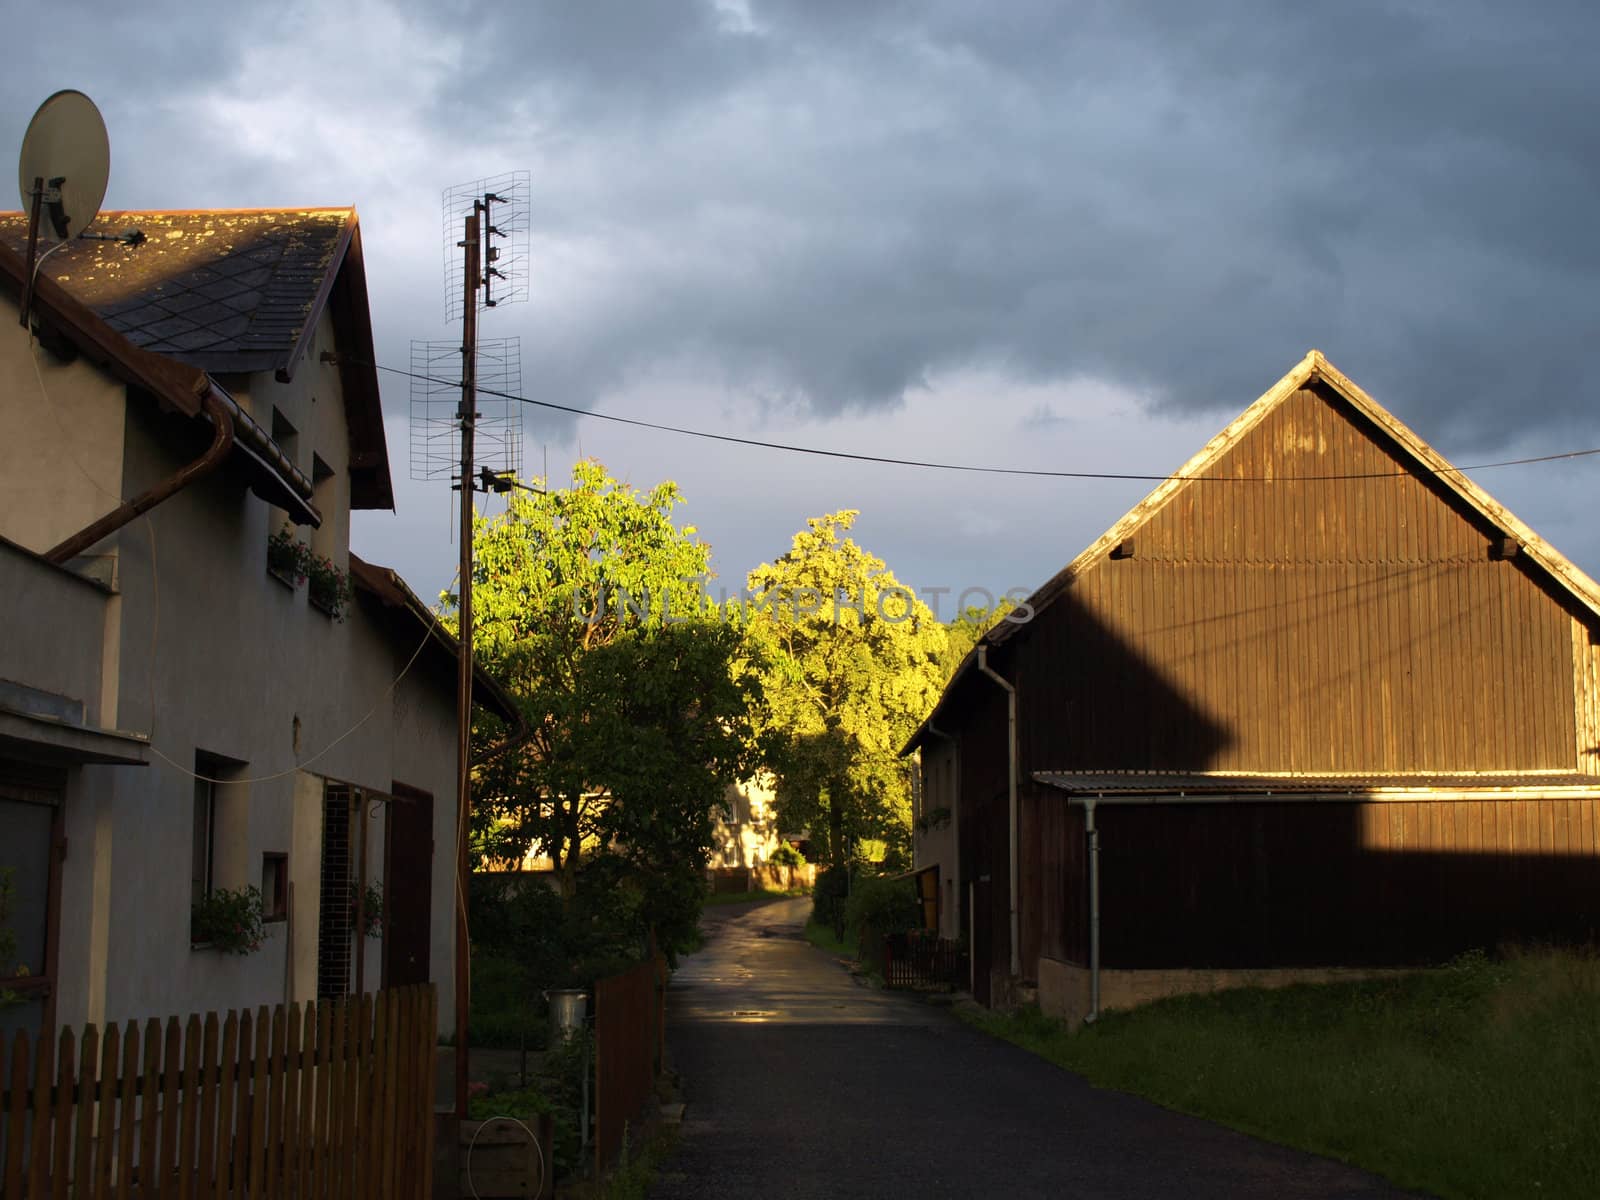 the sunshine before the storm in a village